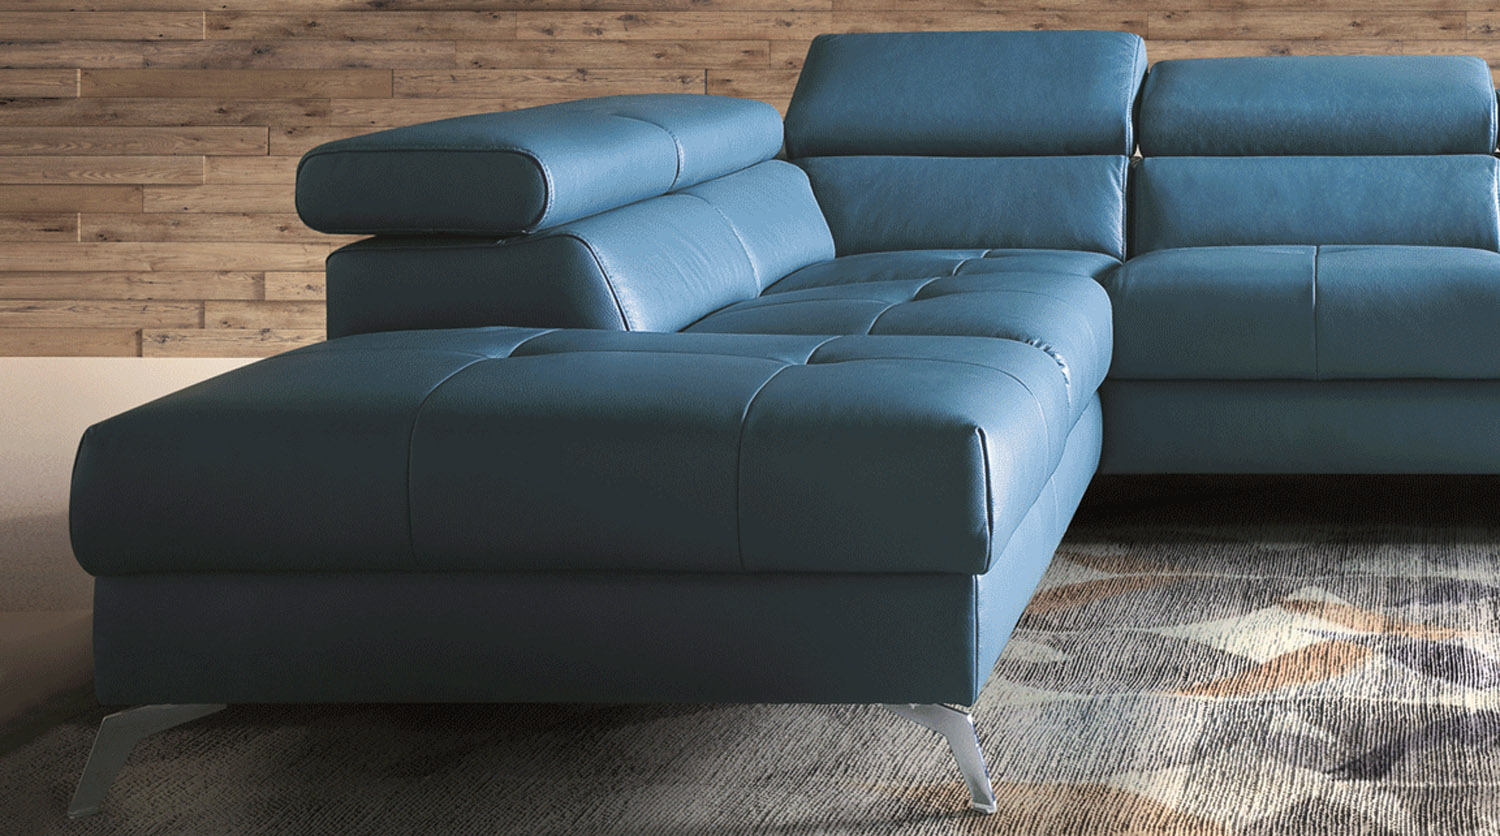 Advanced Adjustable Covered in All Leather Sectional - Click Image to Close